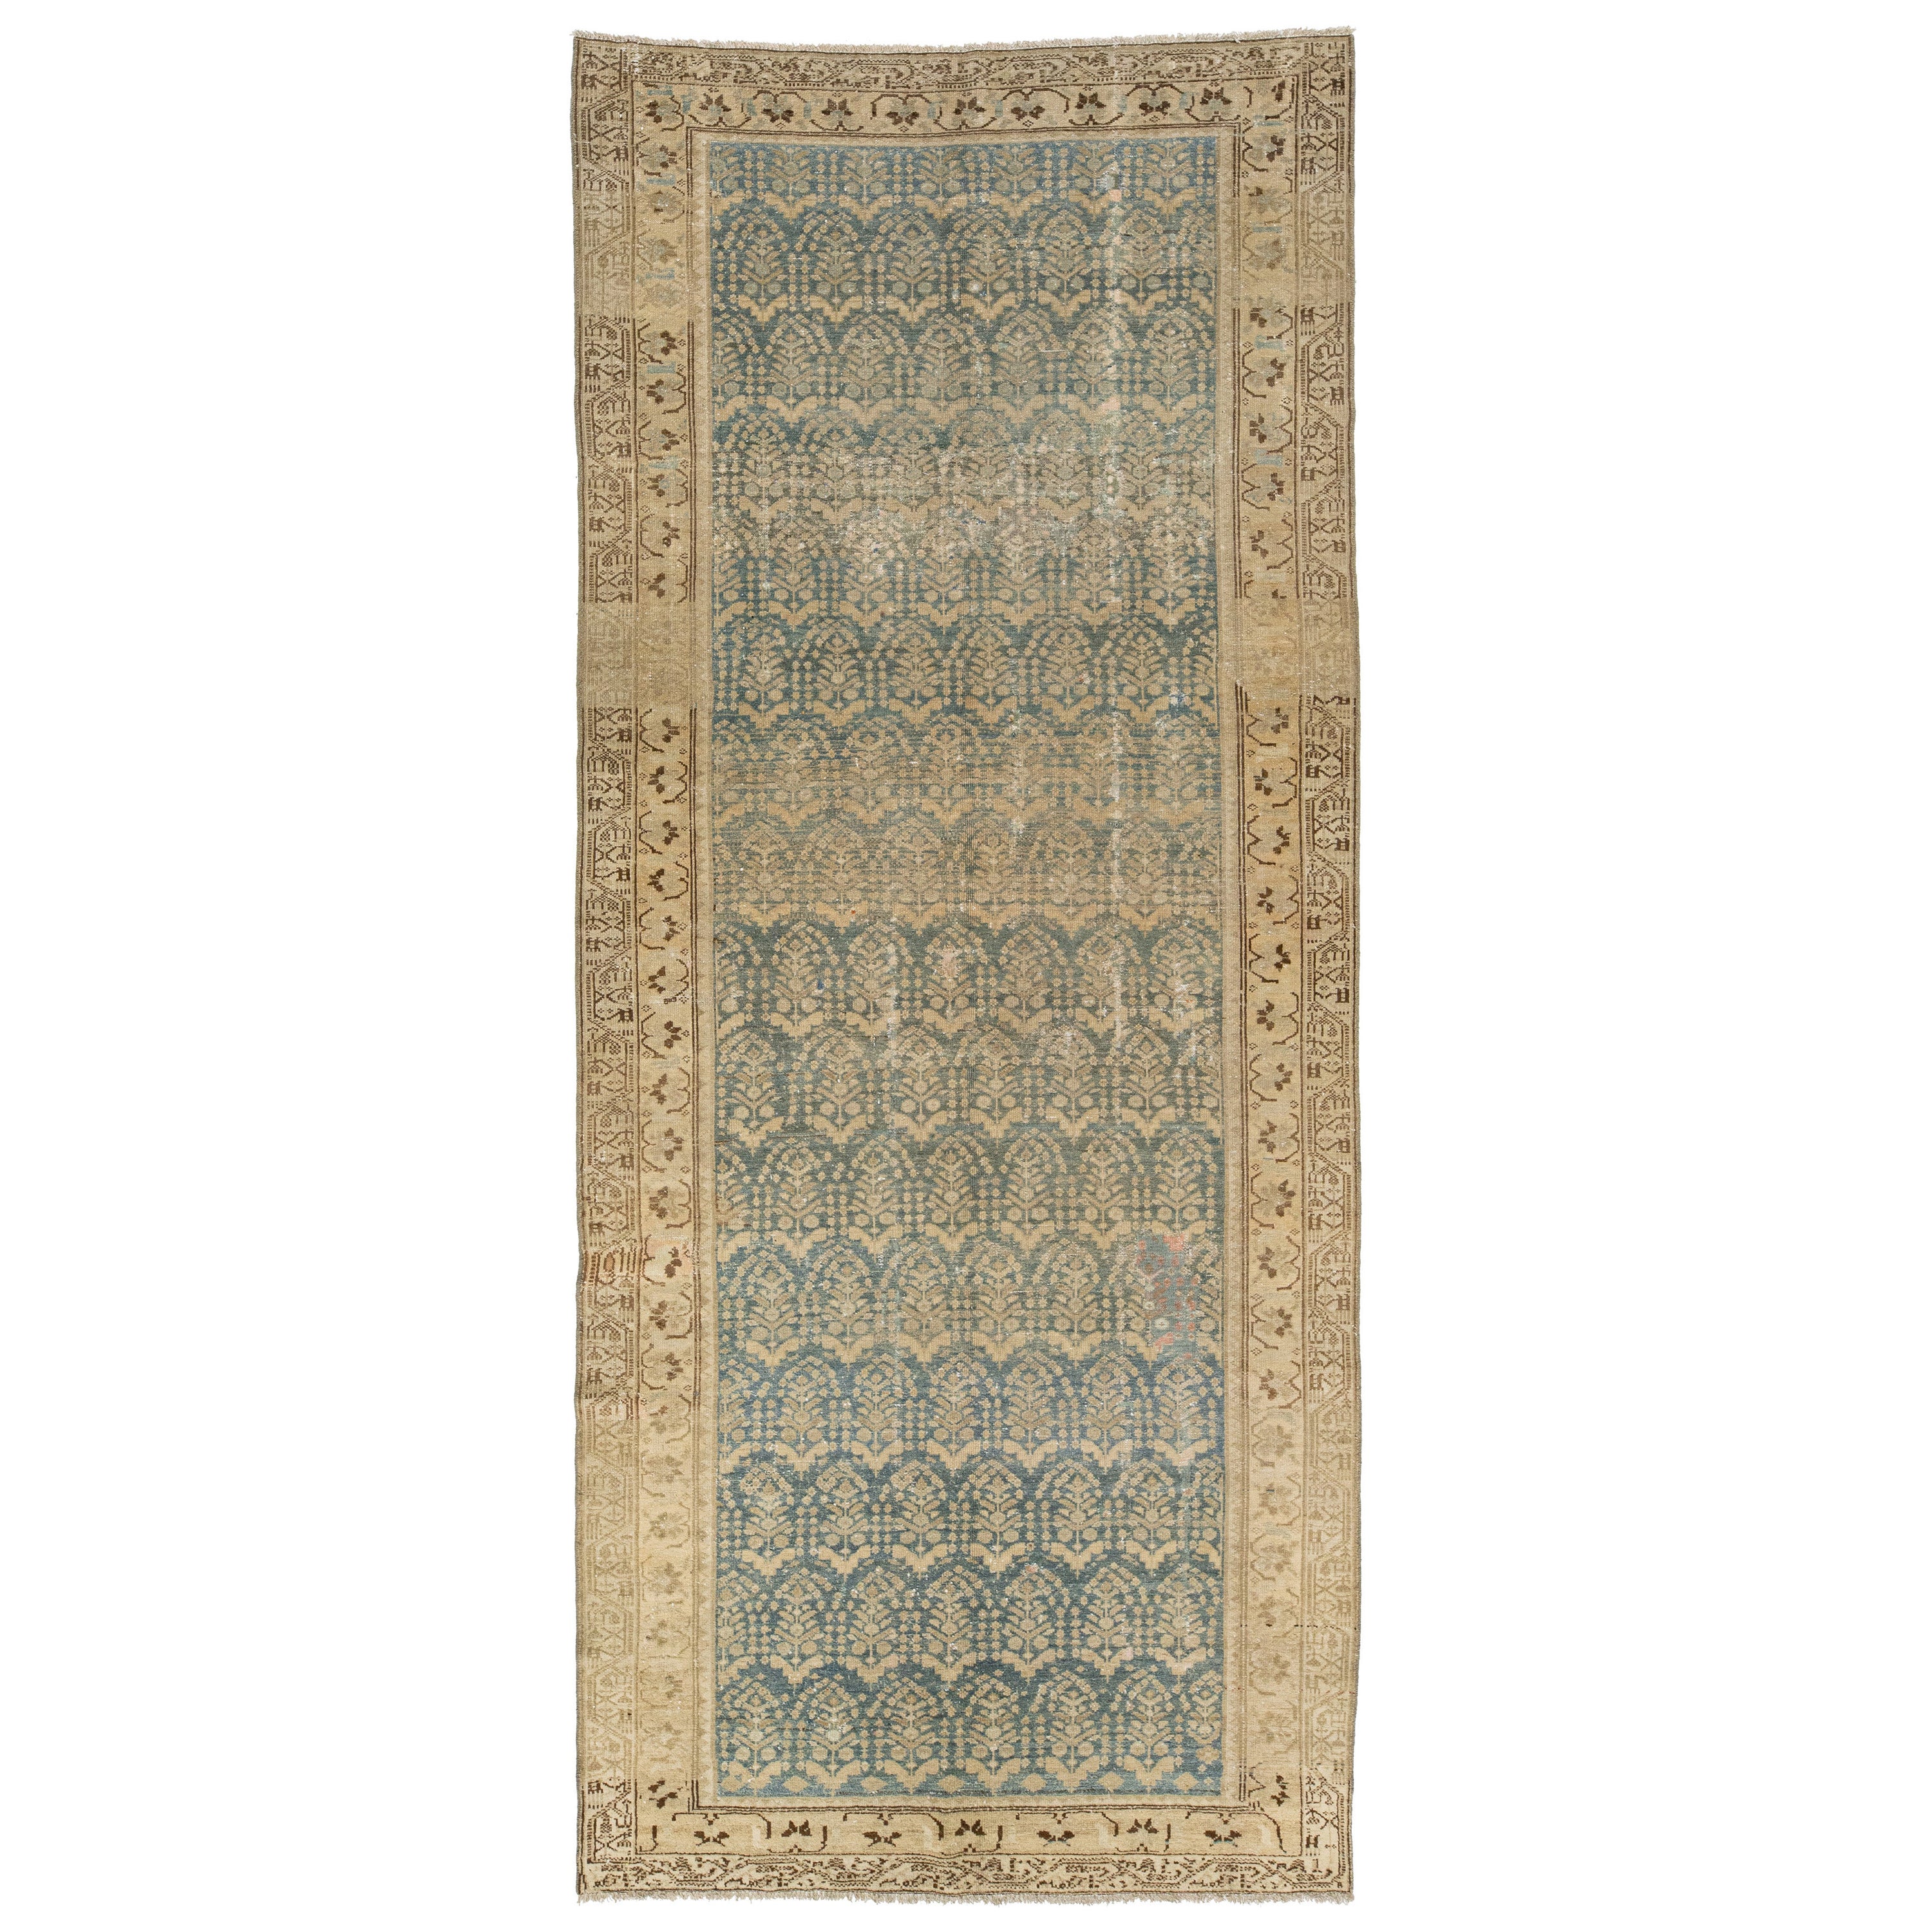 Gallery size Malayer Handmade Persian Antique Wool Rug In Blue For Sale